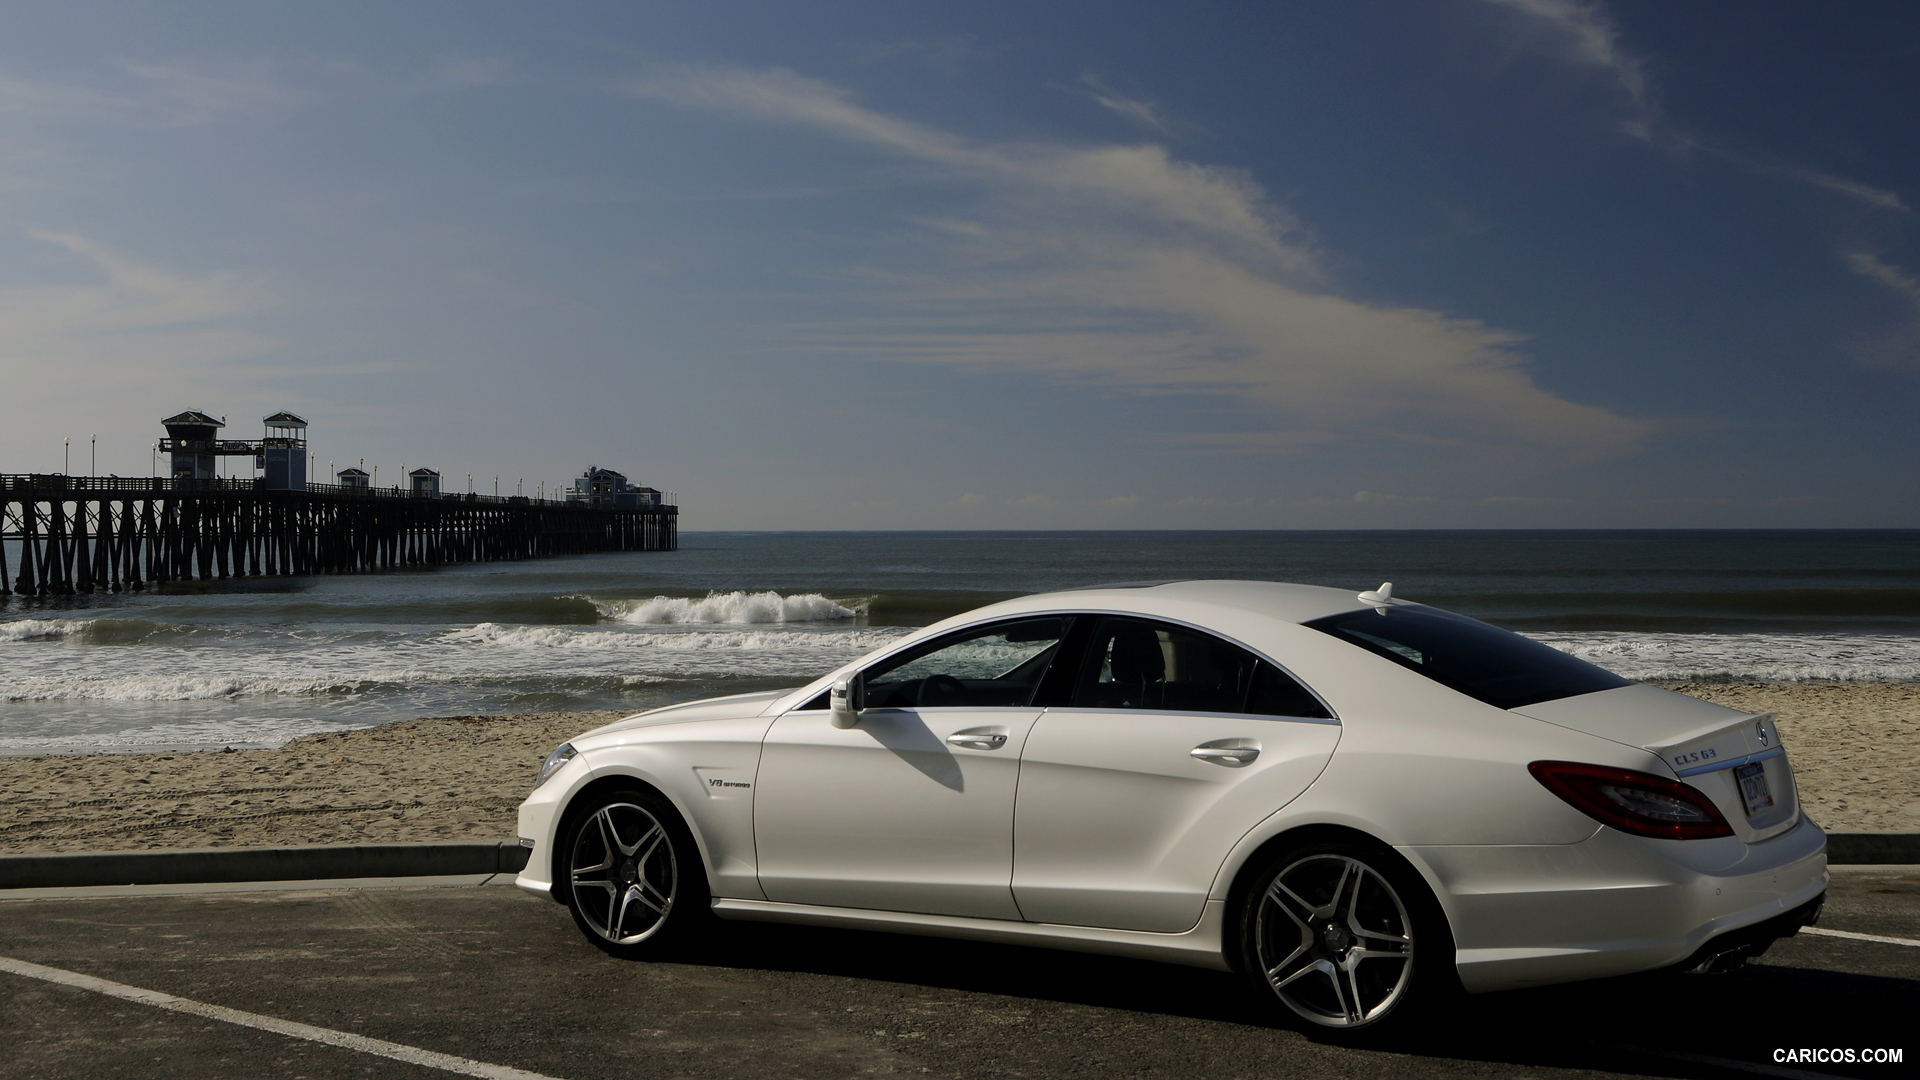 Mercedes-Benz CLS63 AMG (2012) US-Version - Diamond White - Side, #15 of 100